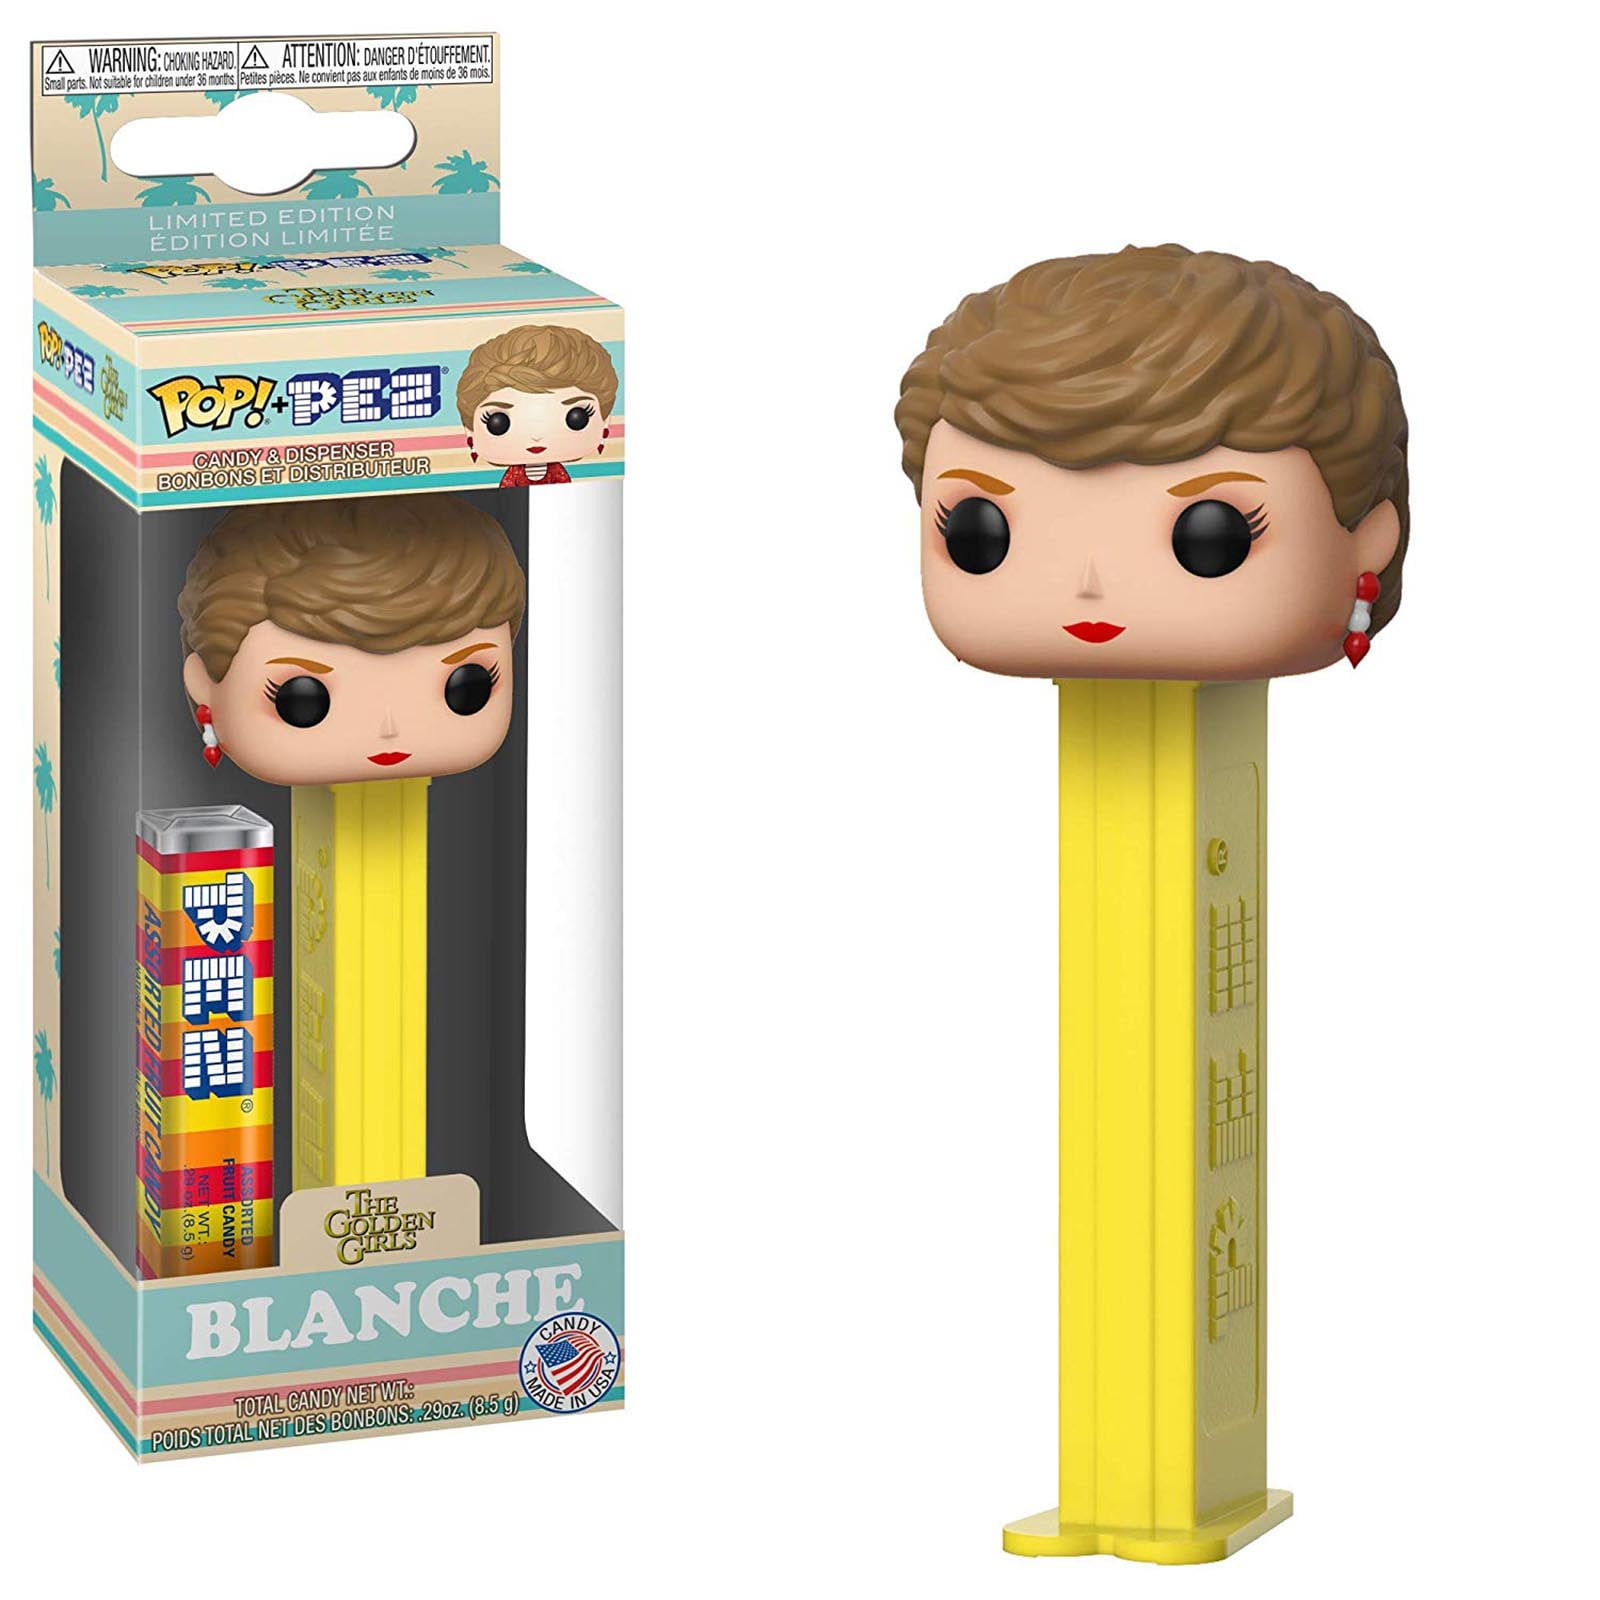 Distributeur PEZ Stranger Things – Candy's Store